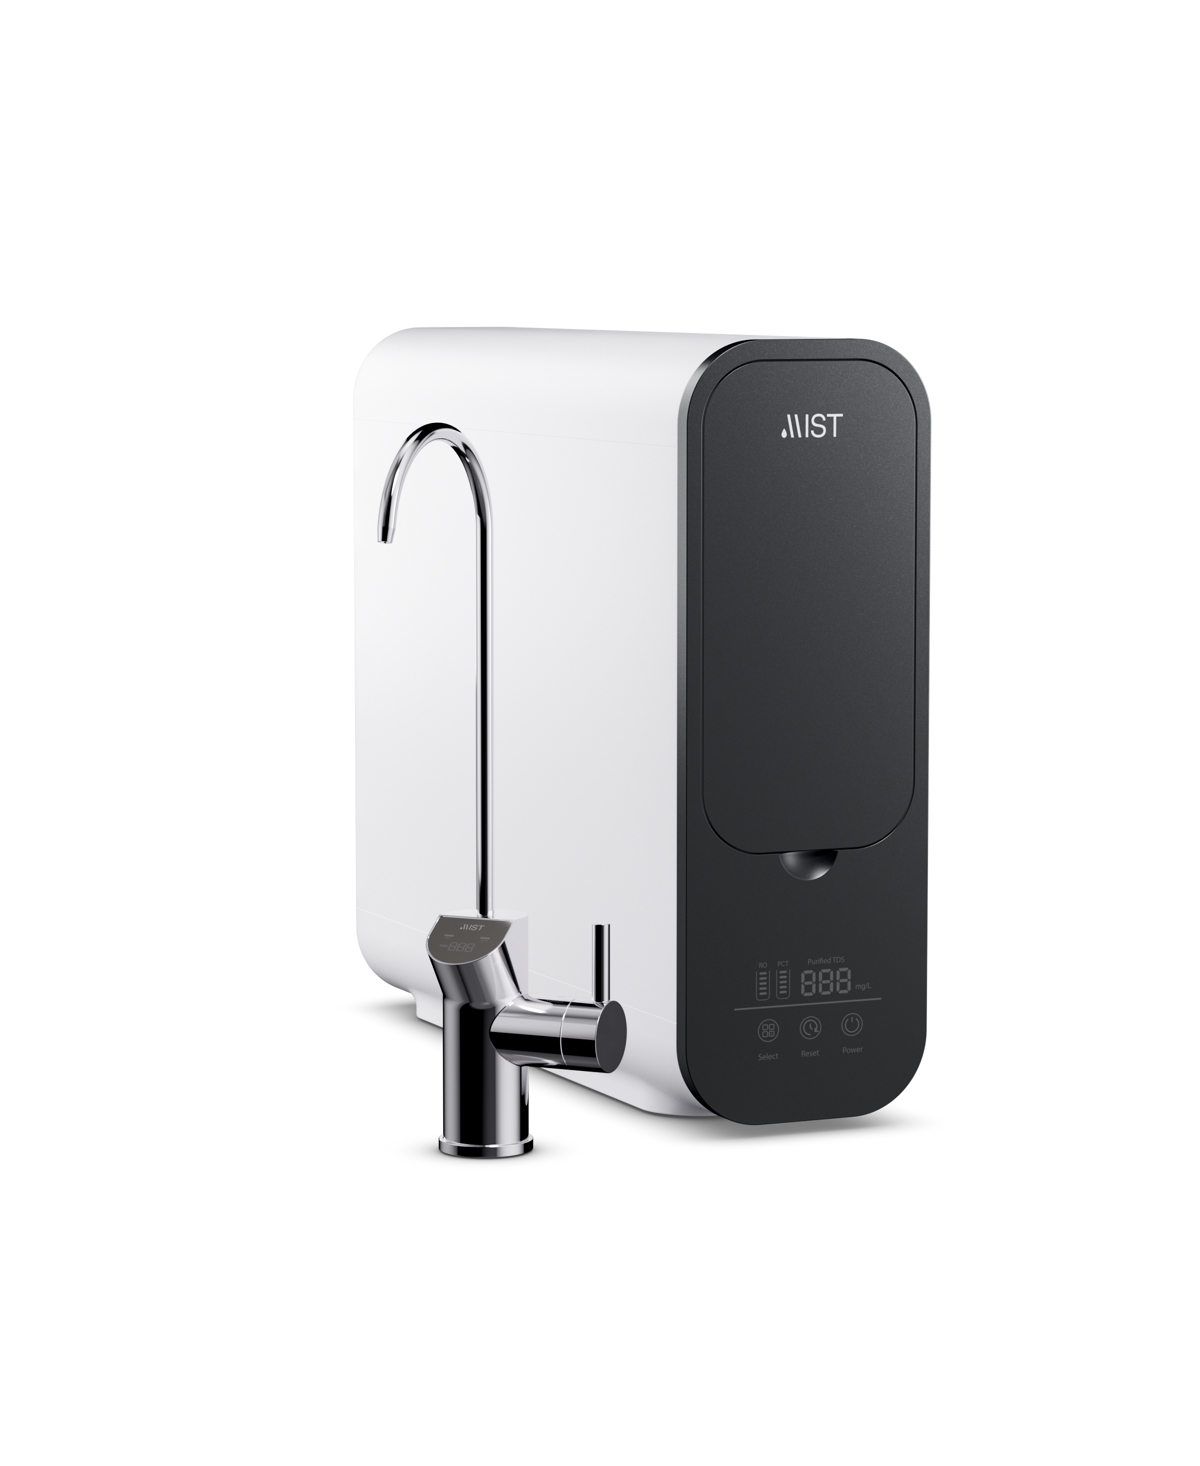 Reverse Osmosis System Under Sink Compact Tankless, Reduces Tds, 600 Gpd, Smart Faucet Real Time Visual Display - White